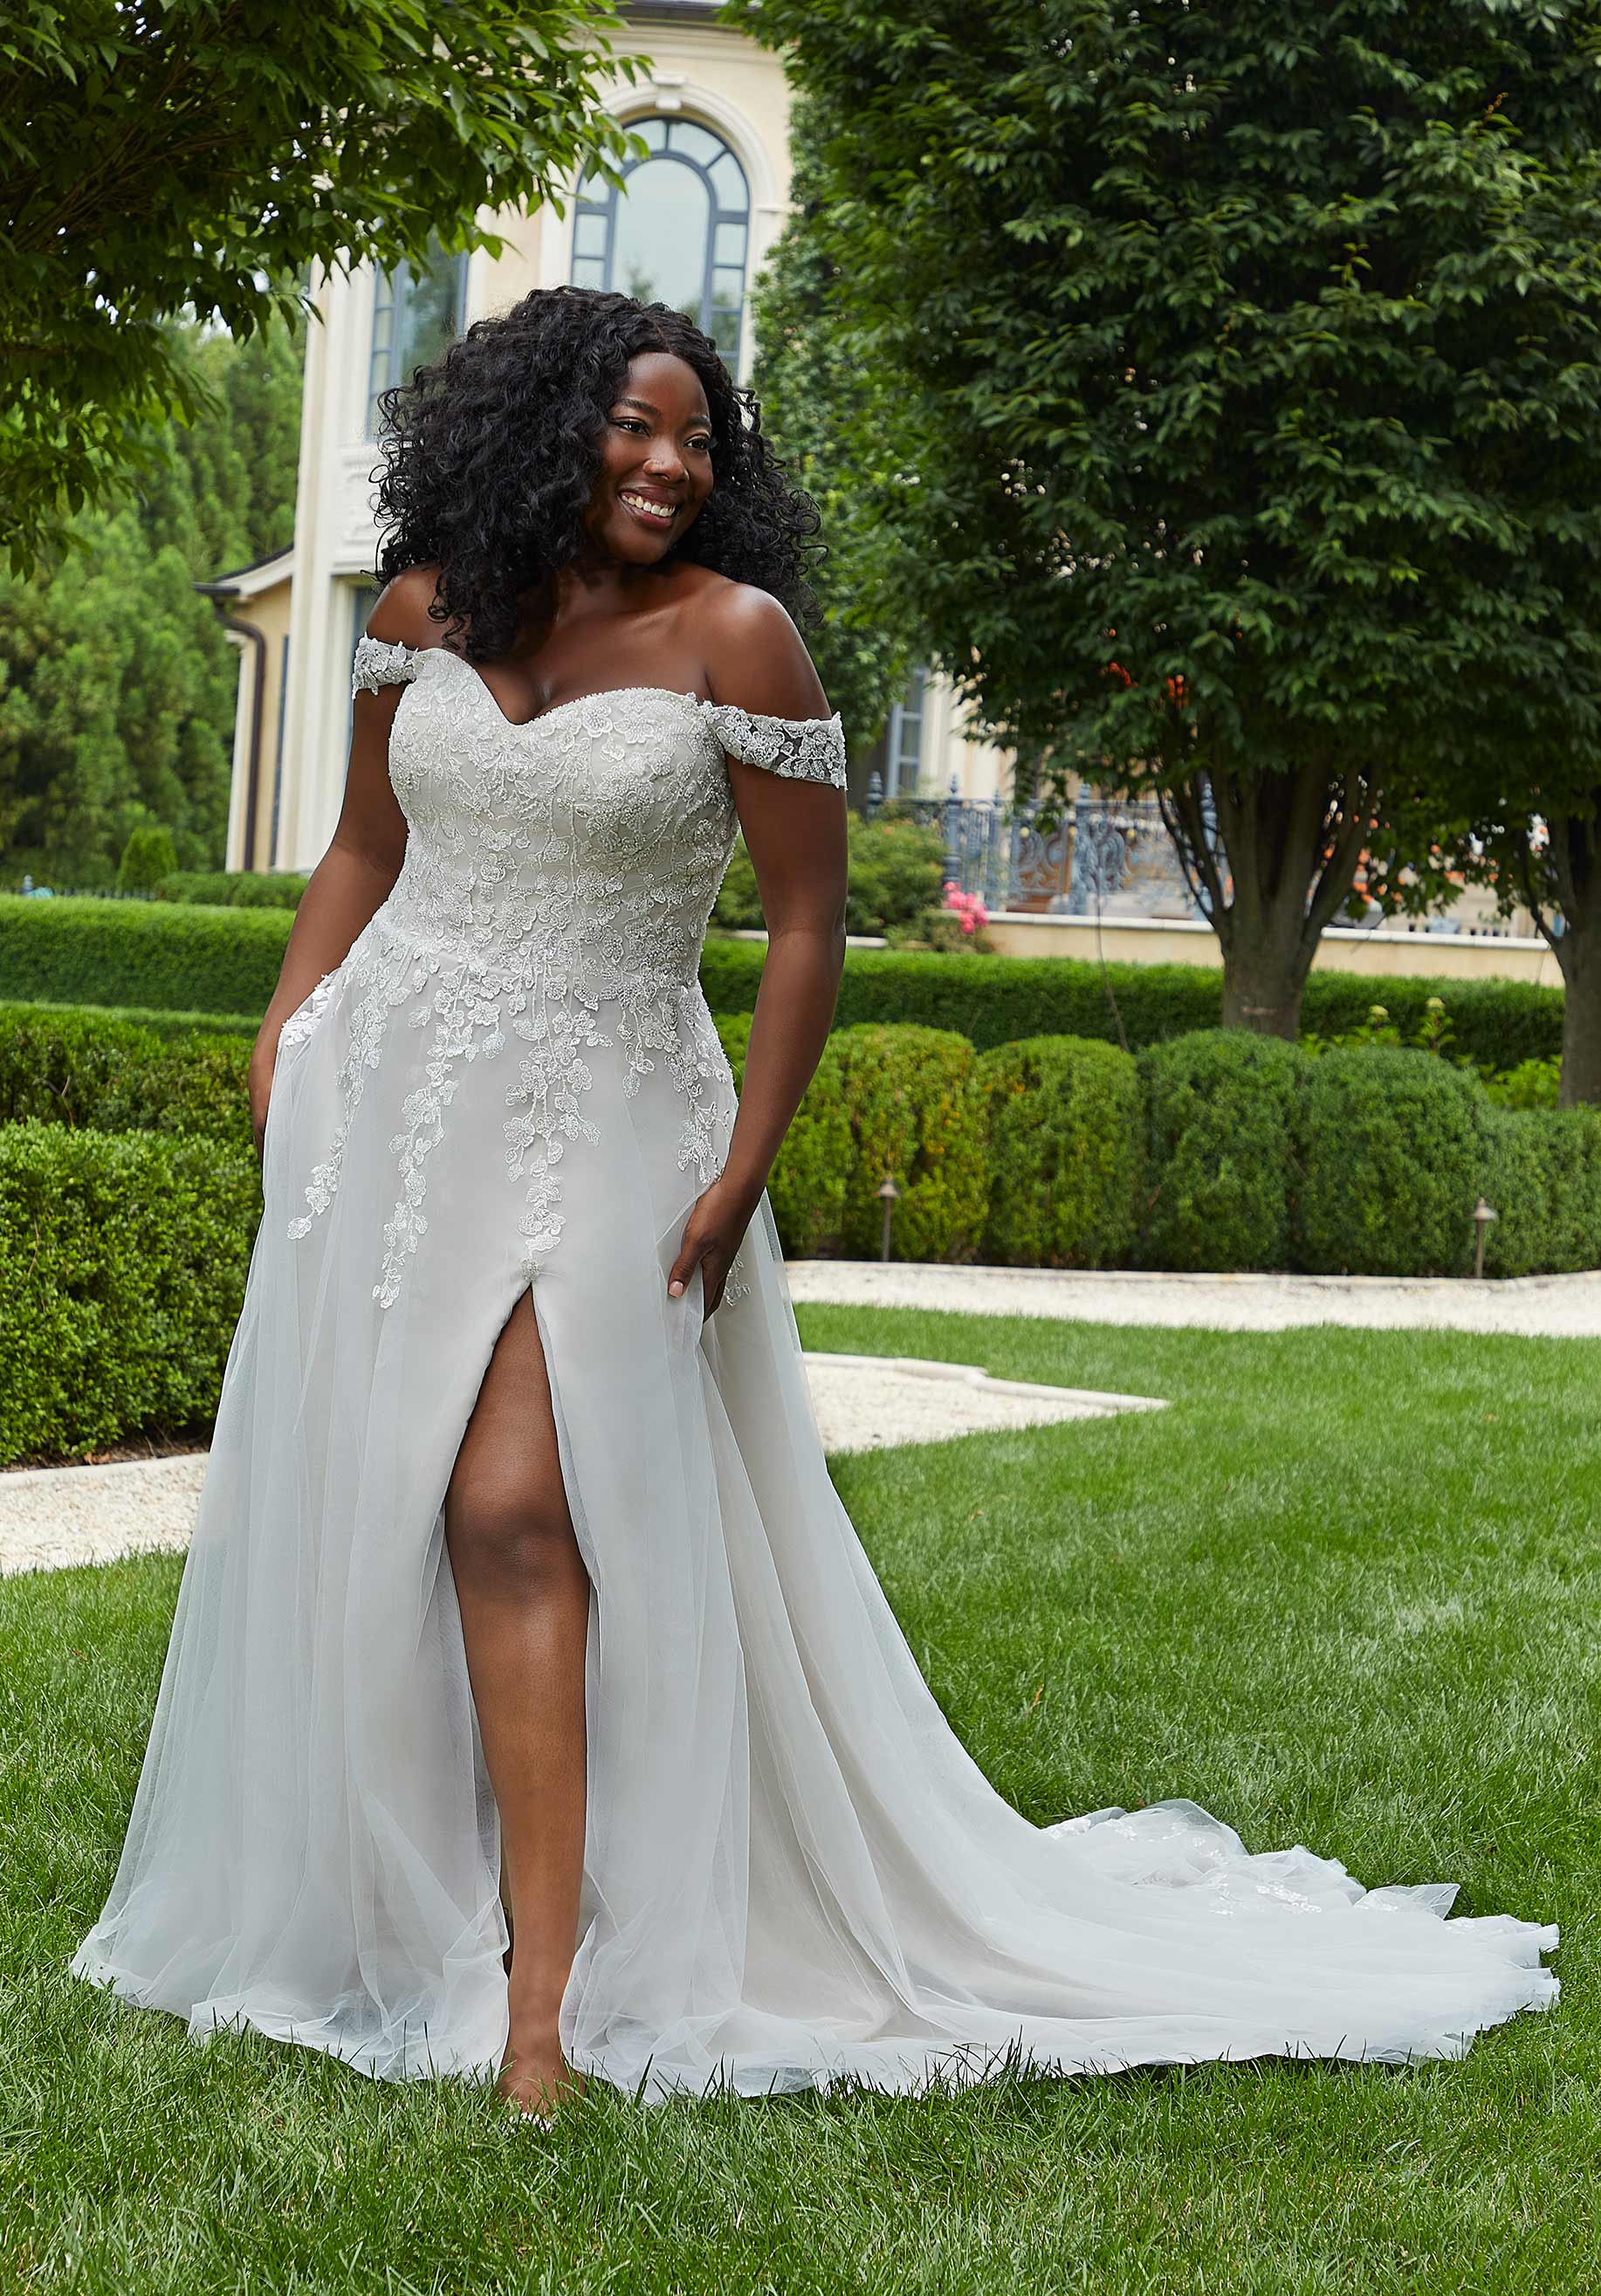 Made to Measure Plus Size Wedding Dresses - Bespoke Bridal Gowns  Plus  wedding dresses, Plus size wedding dresses with sleeves, Wedding gowns with  sleeves